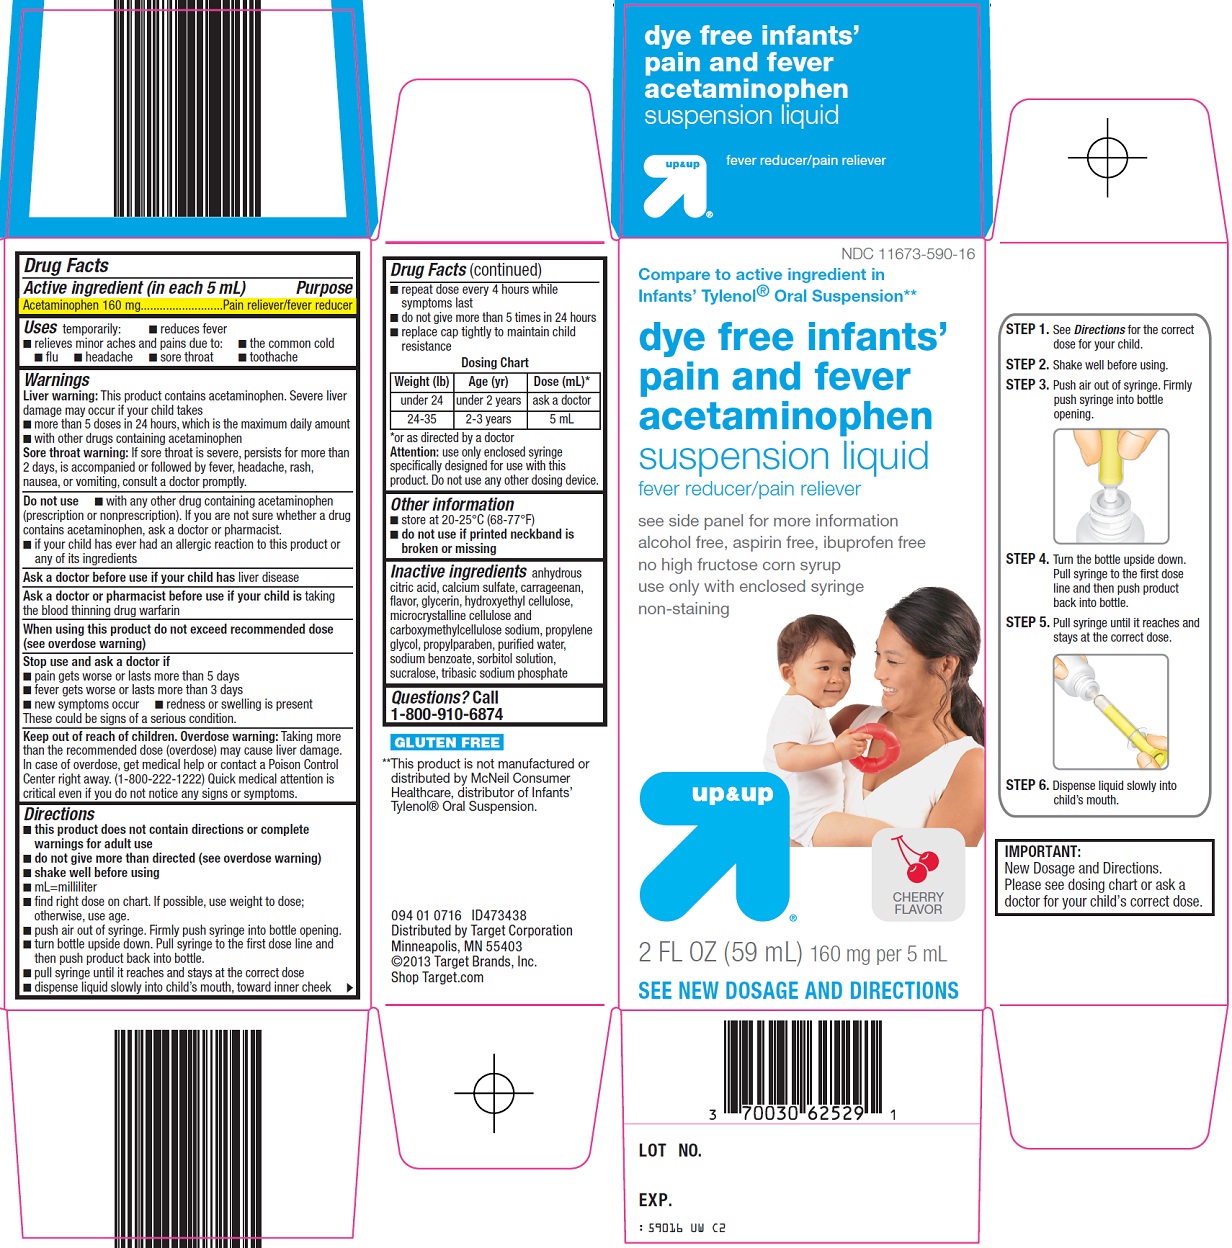 Up and Up Dye Free Infants' Pain and Fever Acetaminophen Image